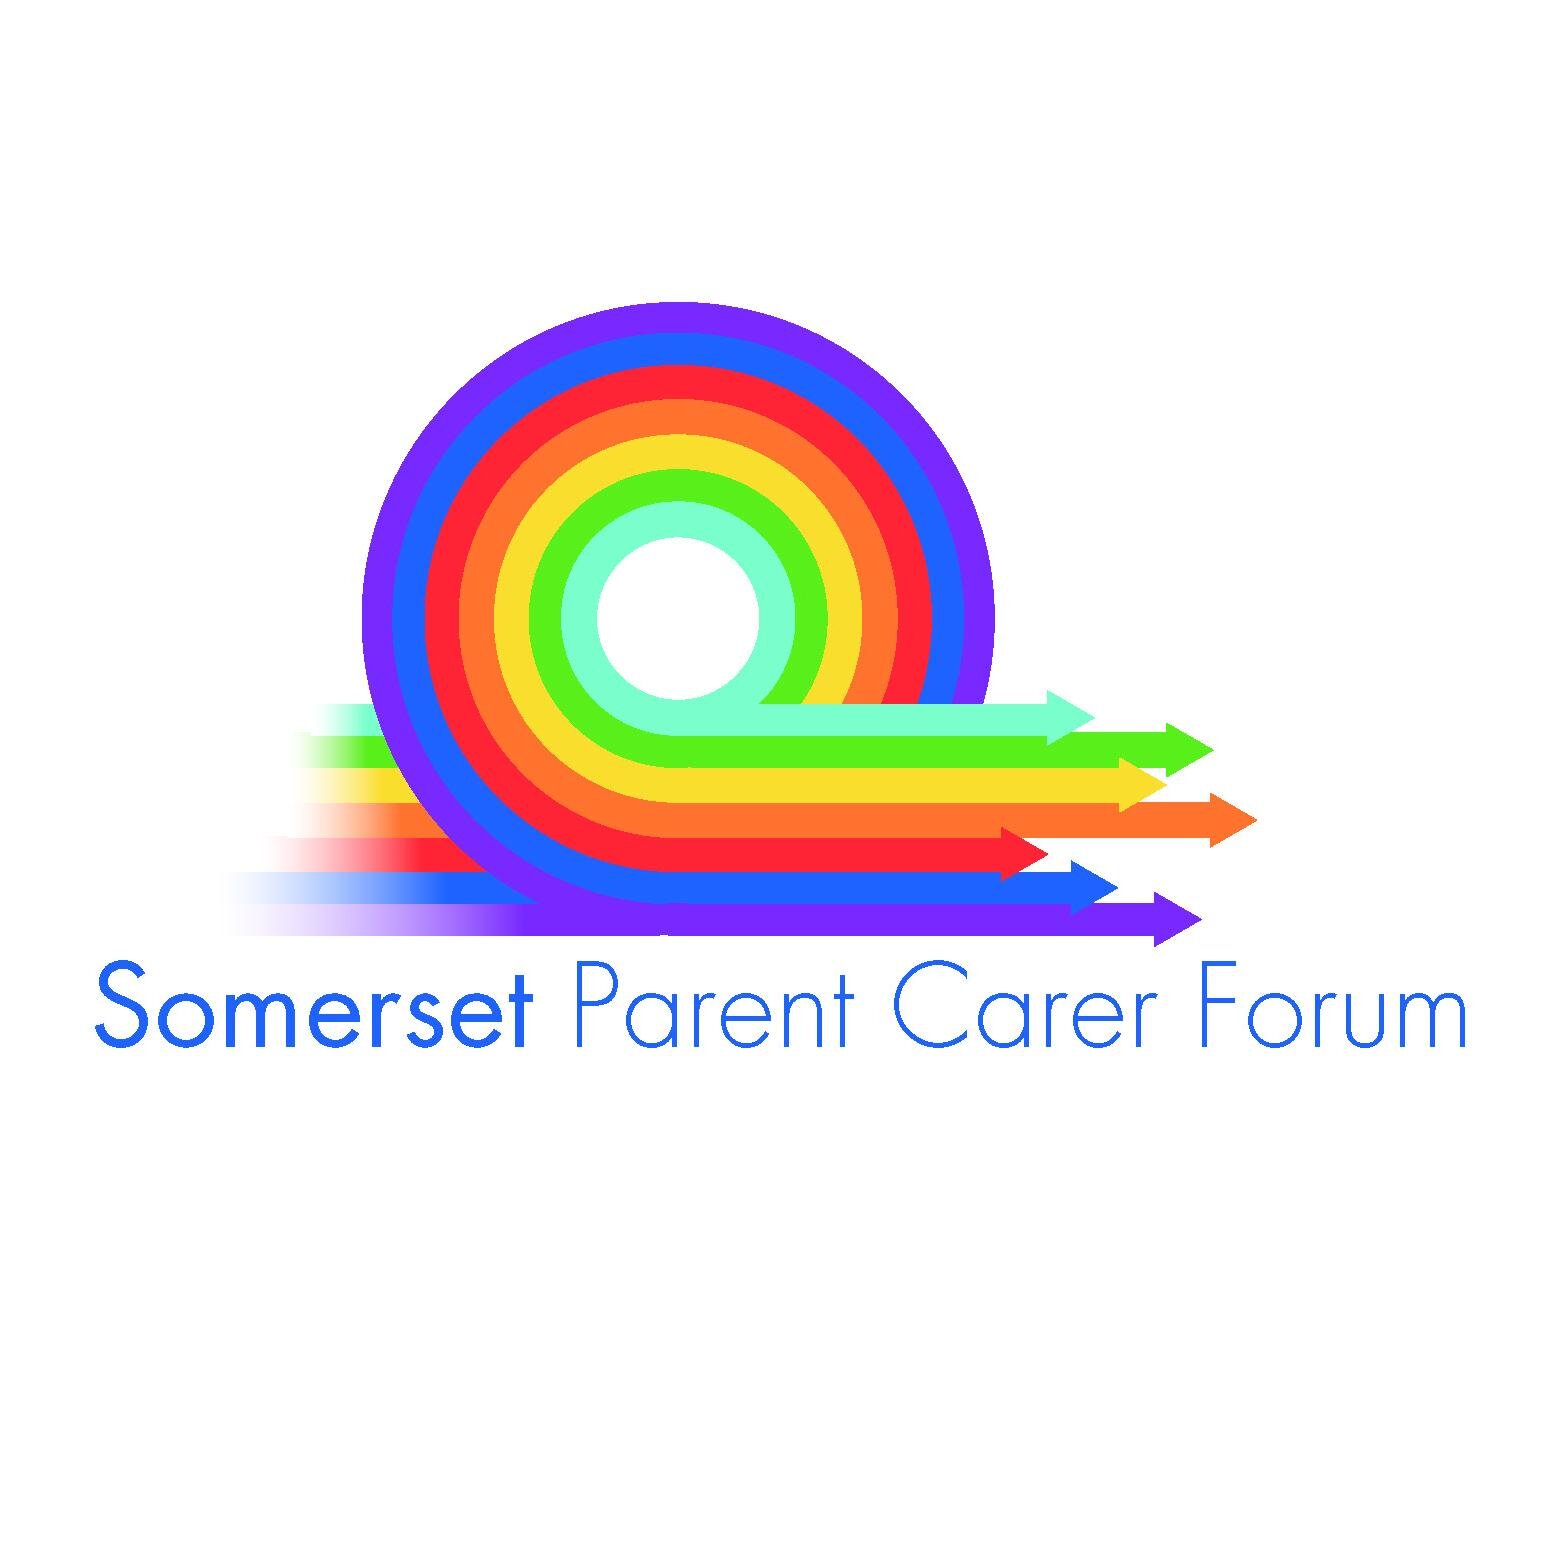 A collaboration of parent carers with a child with SEN or a disability. We signpost and inform. We work with the LA and CCG.